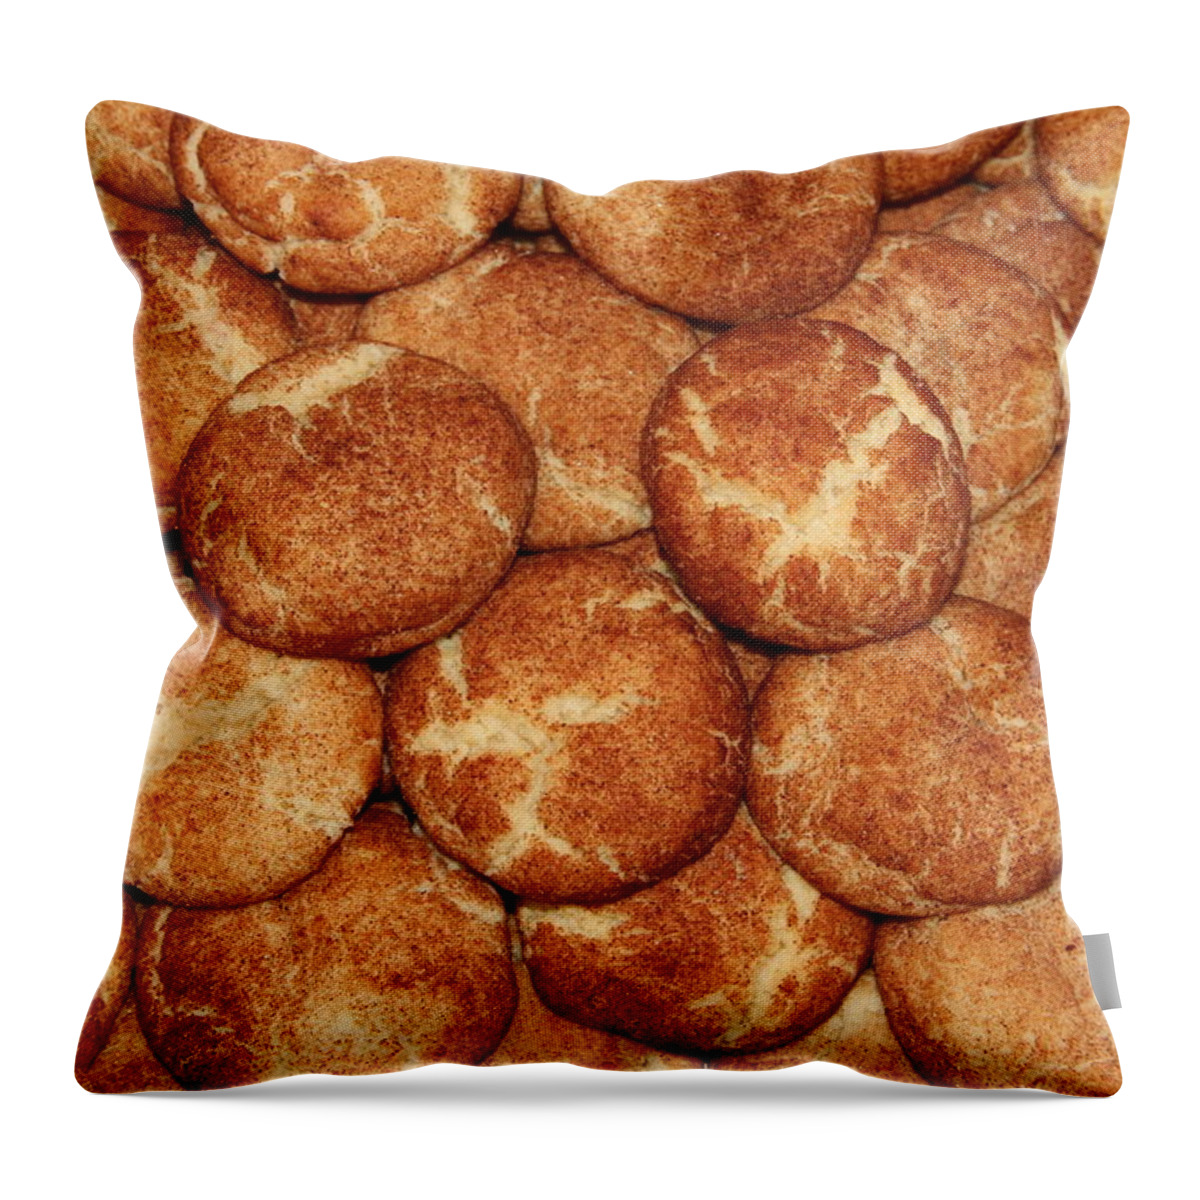 Food Throw Pillow featuring the photograph Cookies 170 by Michael Fryd